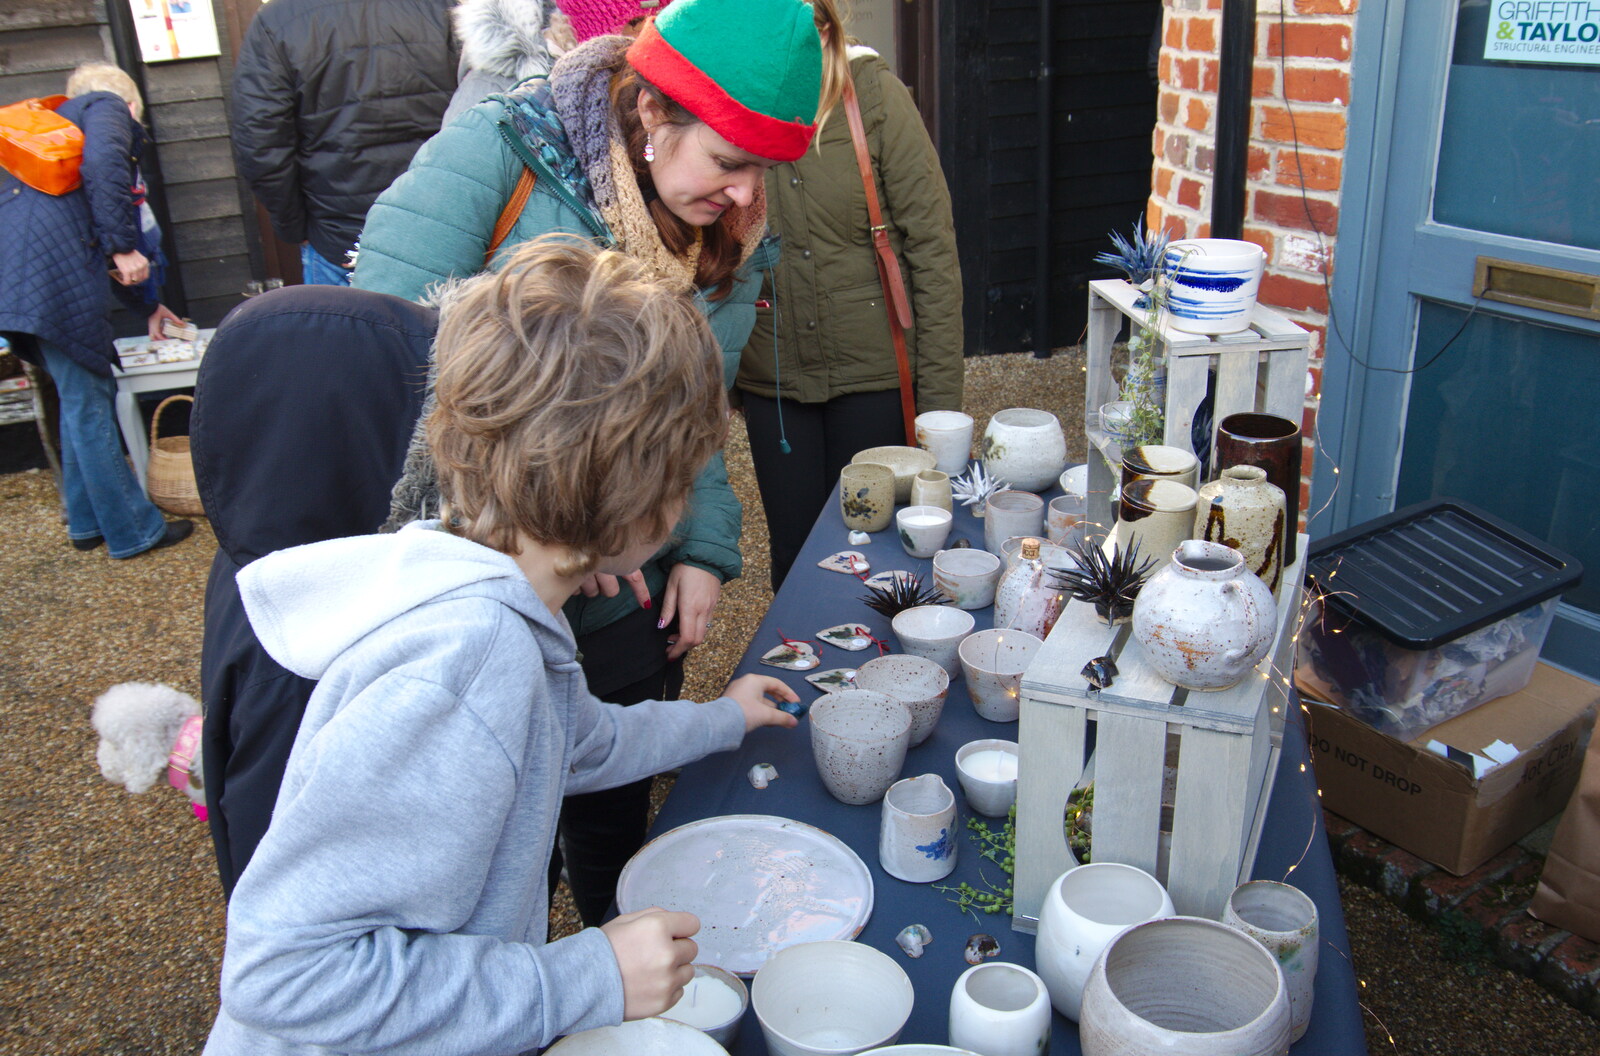 Fred looks at pottery from The St. Nicholas Street Winter Fayre, Diss, Norfolk - 14th December 2019